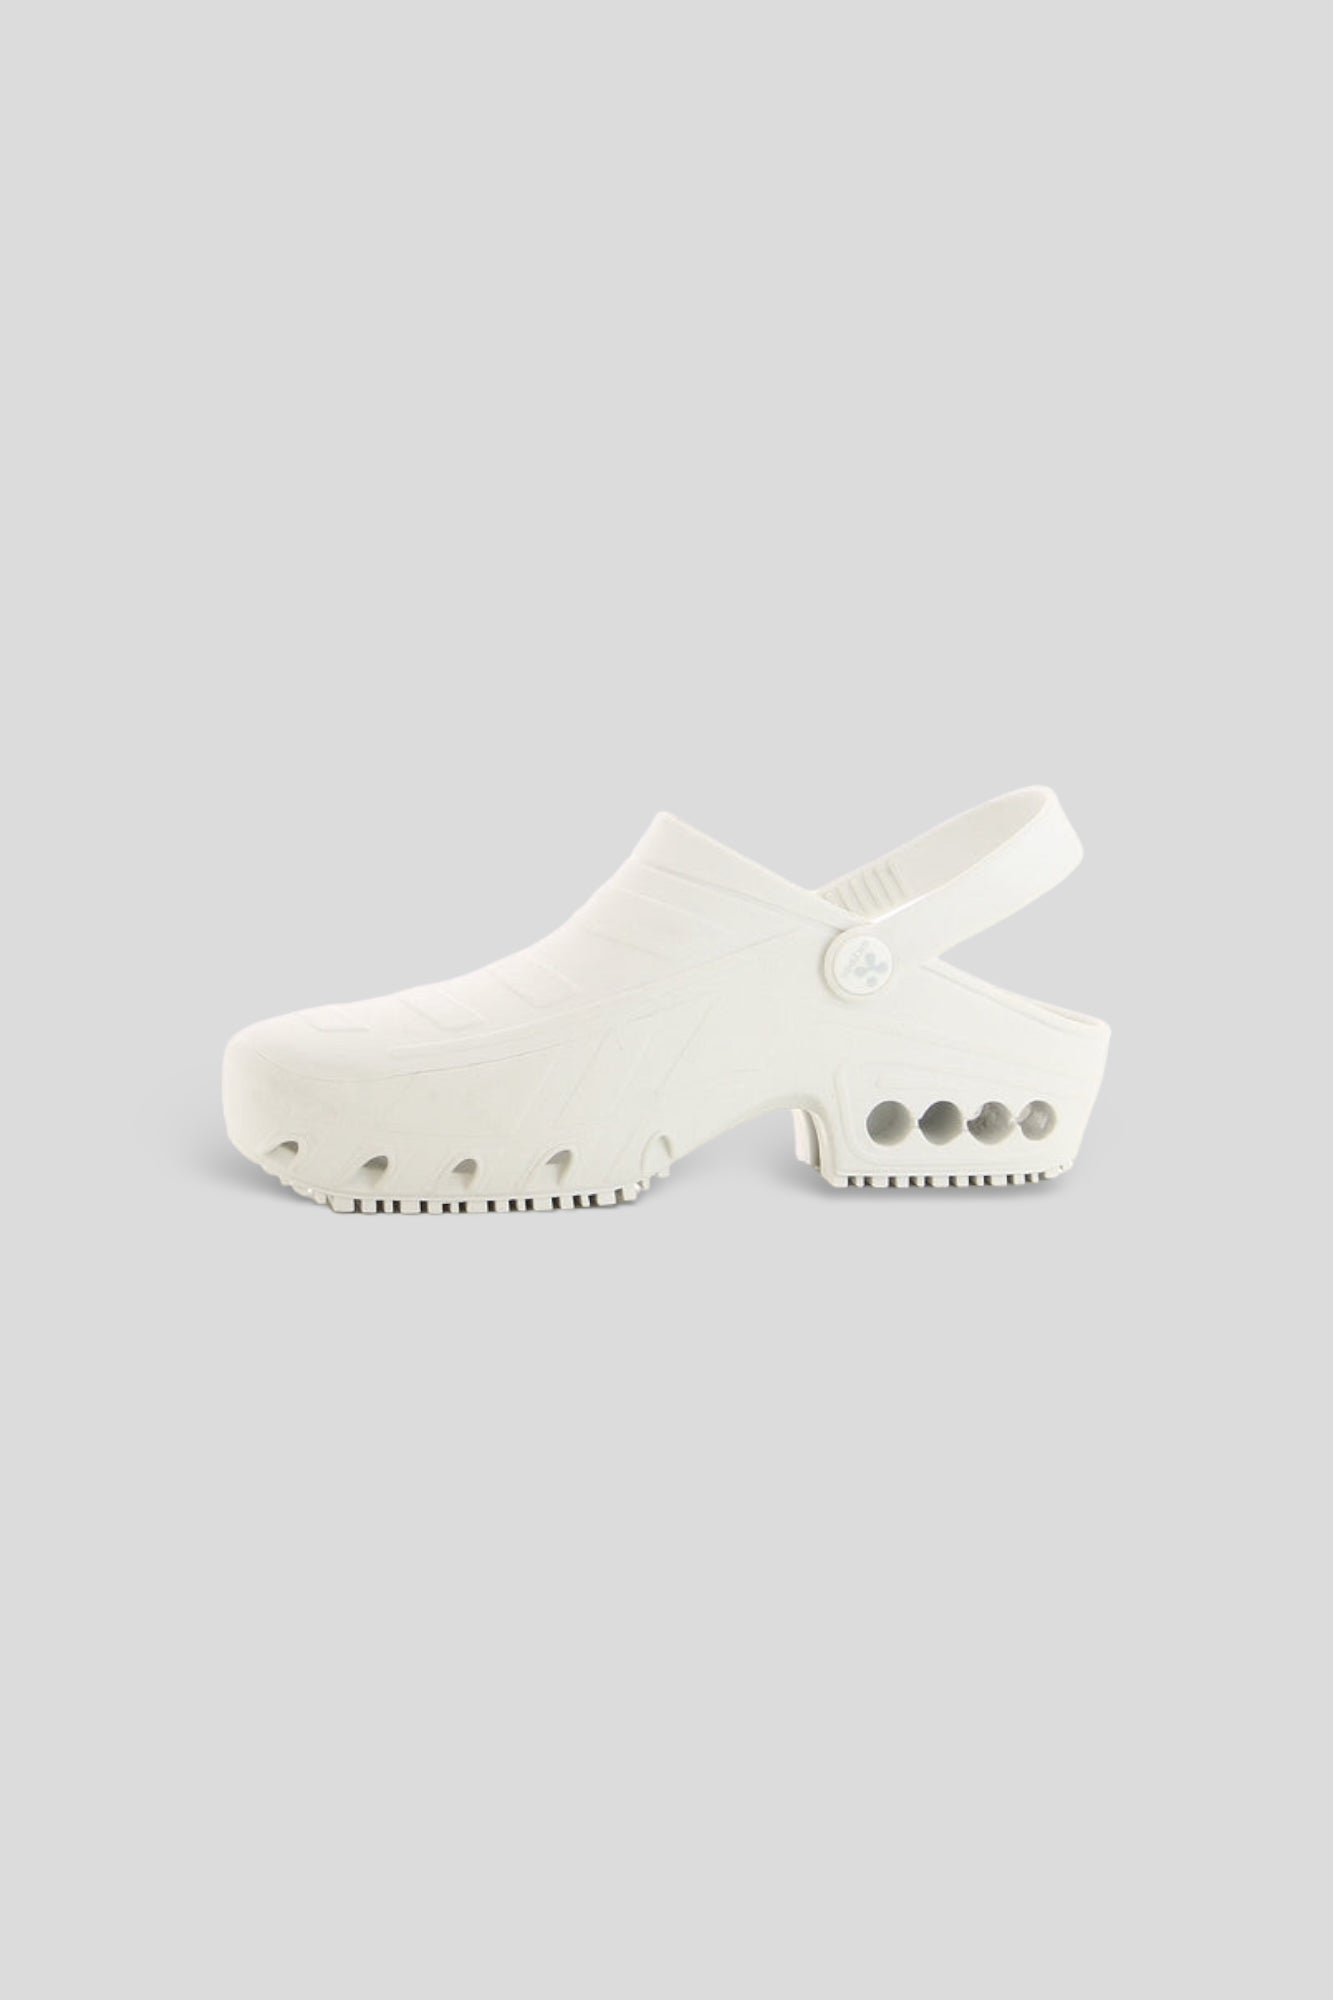 OXYCLOG - AUTOCLAVABLE OPERATING ROOM CLOGS WITH NON-SLIP OUTSOLE